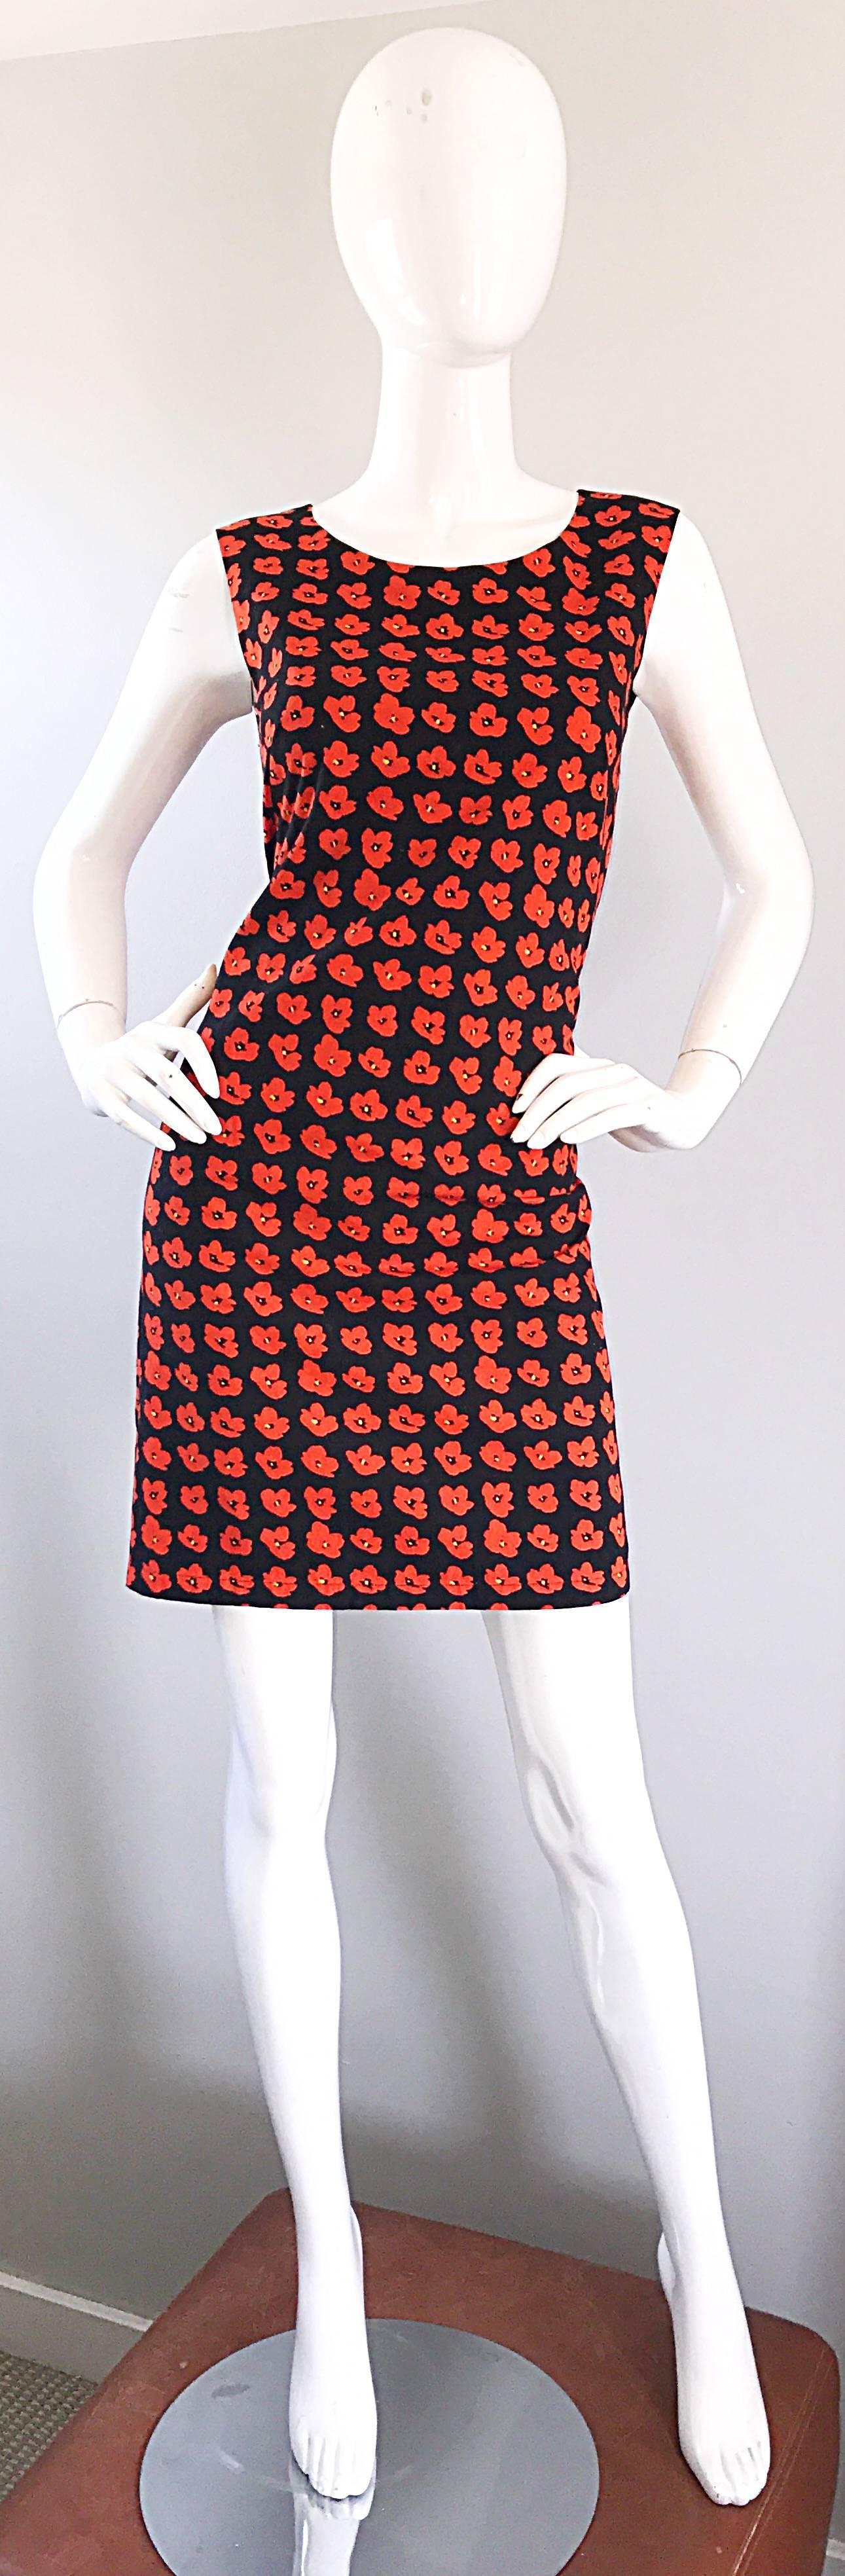 Chic vintage mid 1990s AGNES B three dimensional poppy print cotton French dress! Features red and yellow poppy flowers throughout, with a black background. Hidden zipper up the back with hook-and-eye closure. Fully lined. Can easily be dressed up